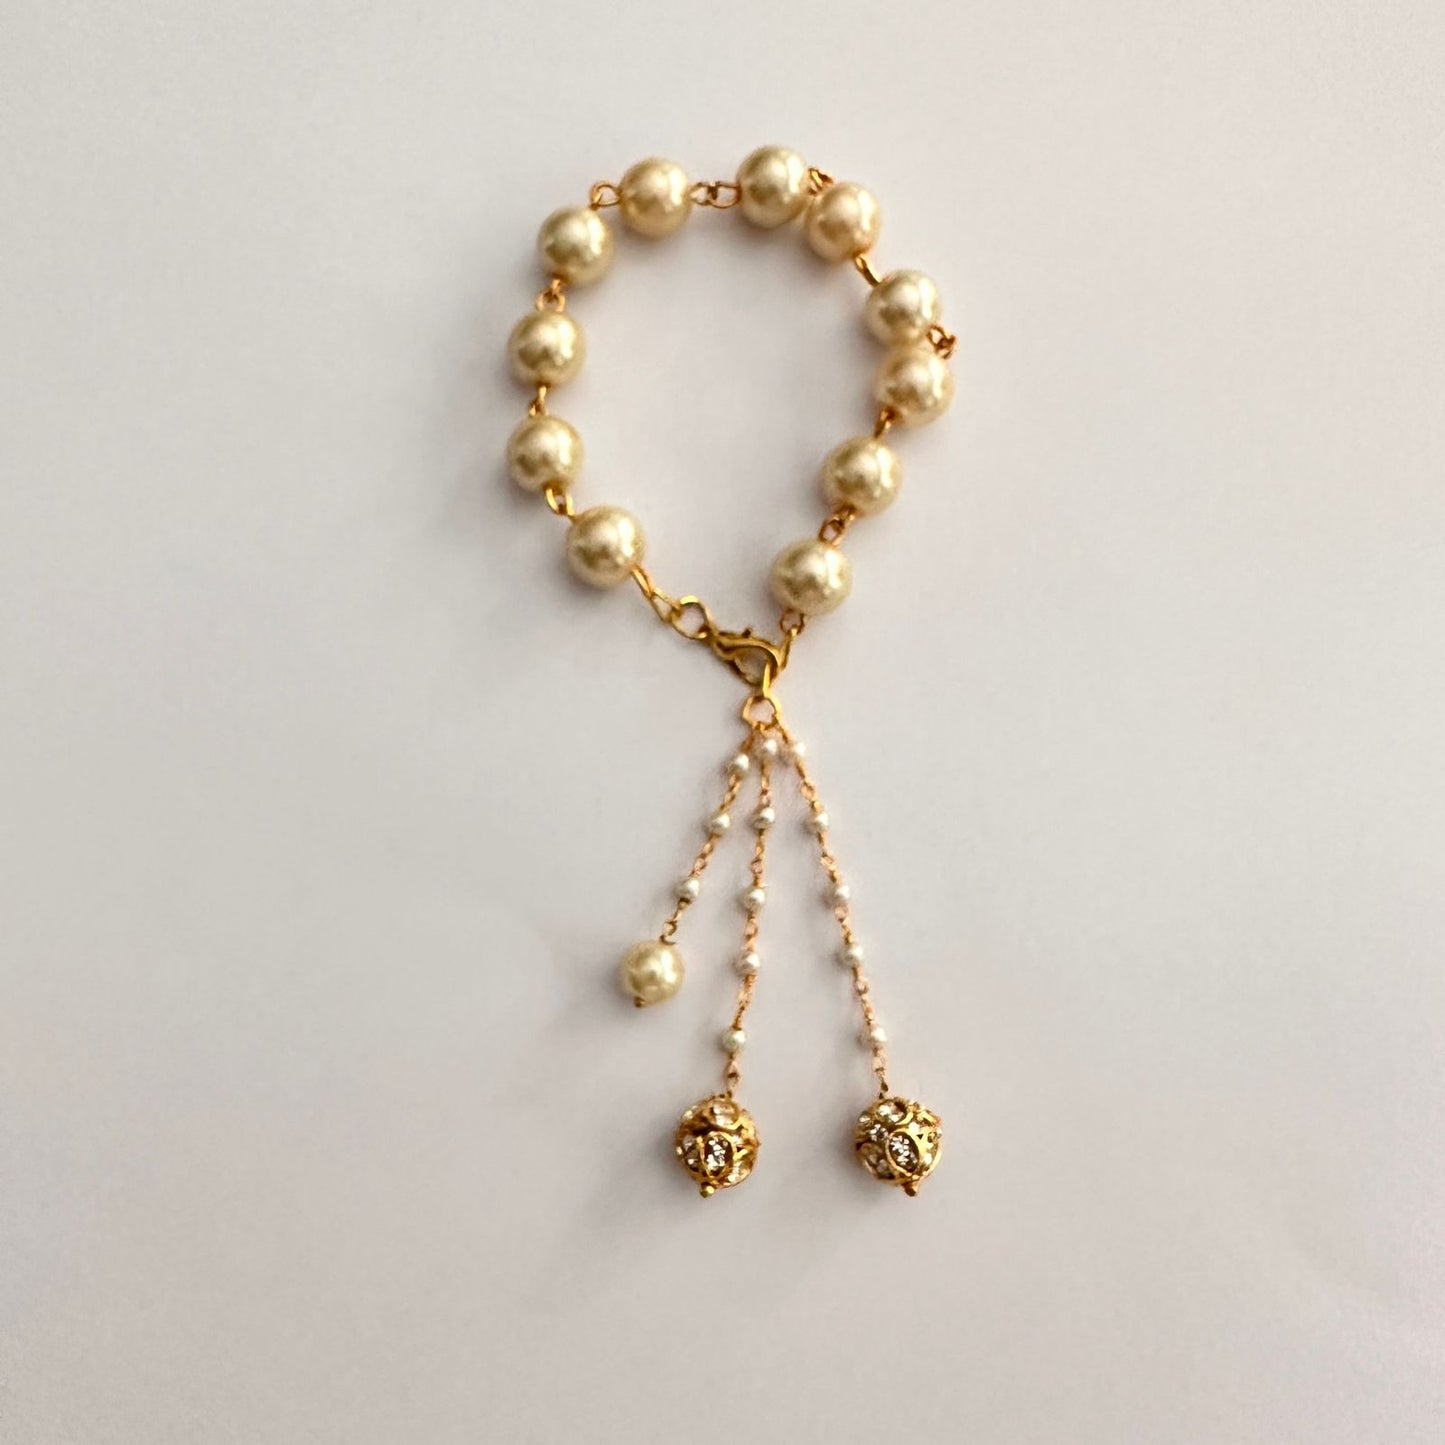 OFF-WHITE PEARL WITH GOLD PLATED CHAIN LUMBA RAKHI FOR WOMEN